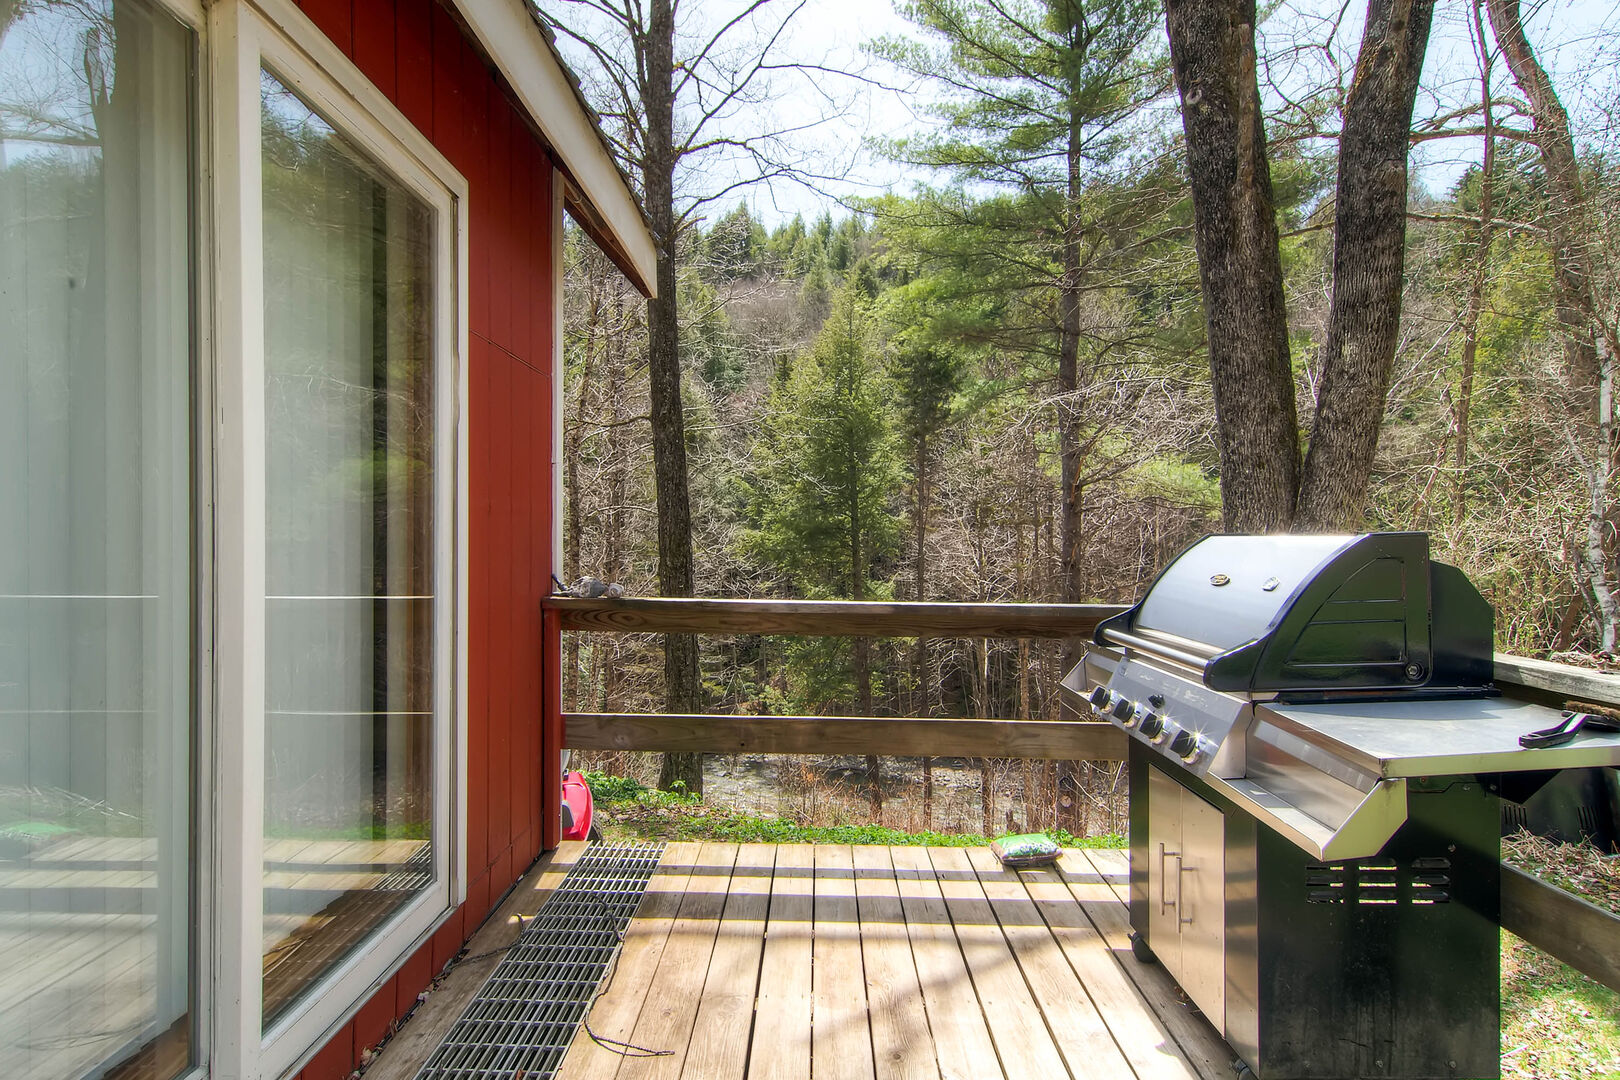 Outside deck with gas grill